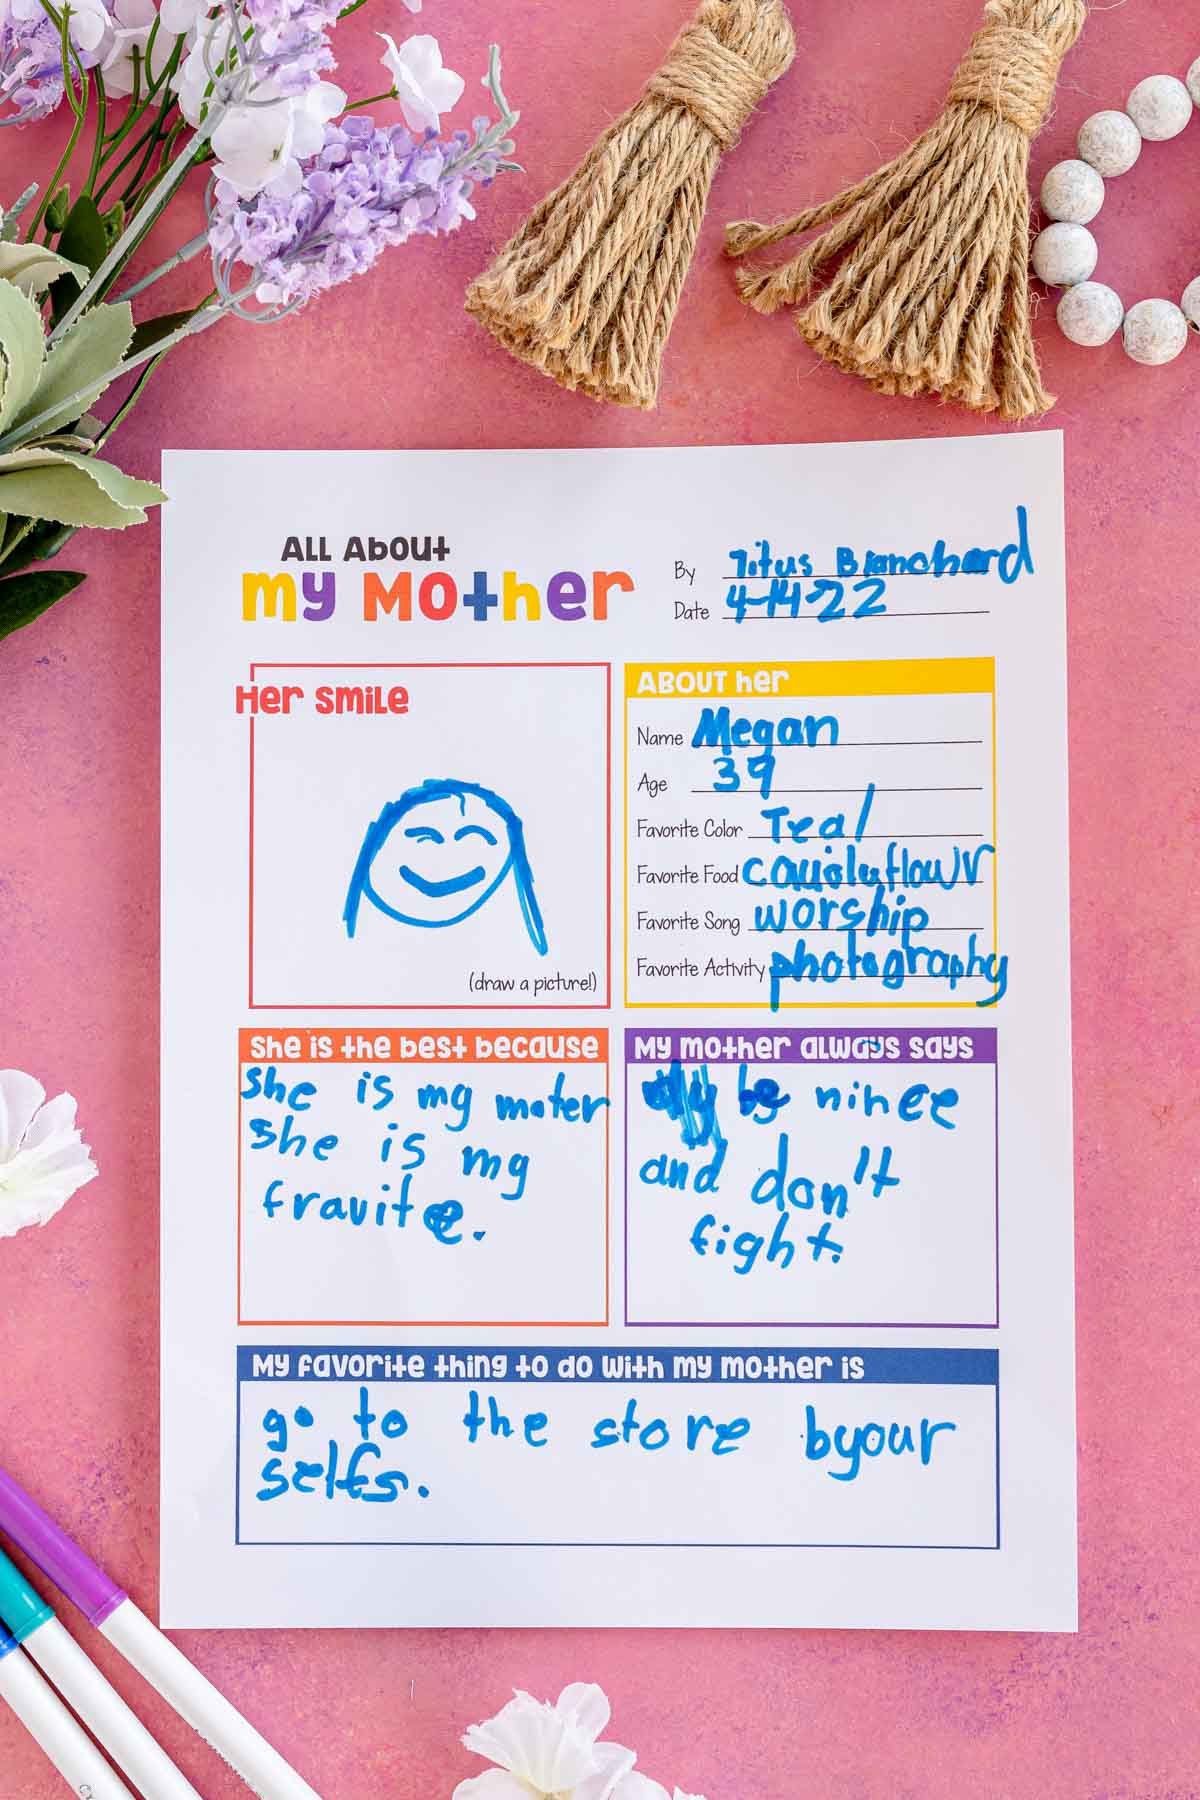 How I Organize My Kids Activities - The Mama Notes